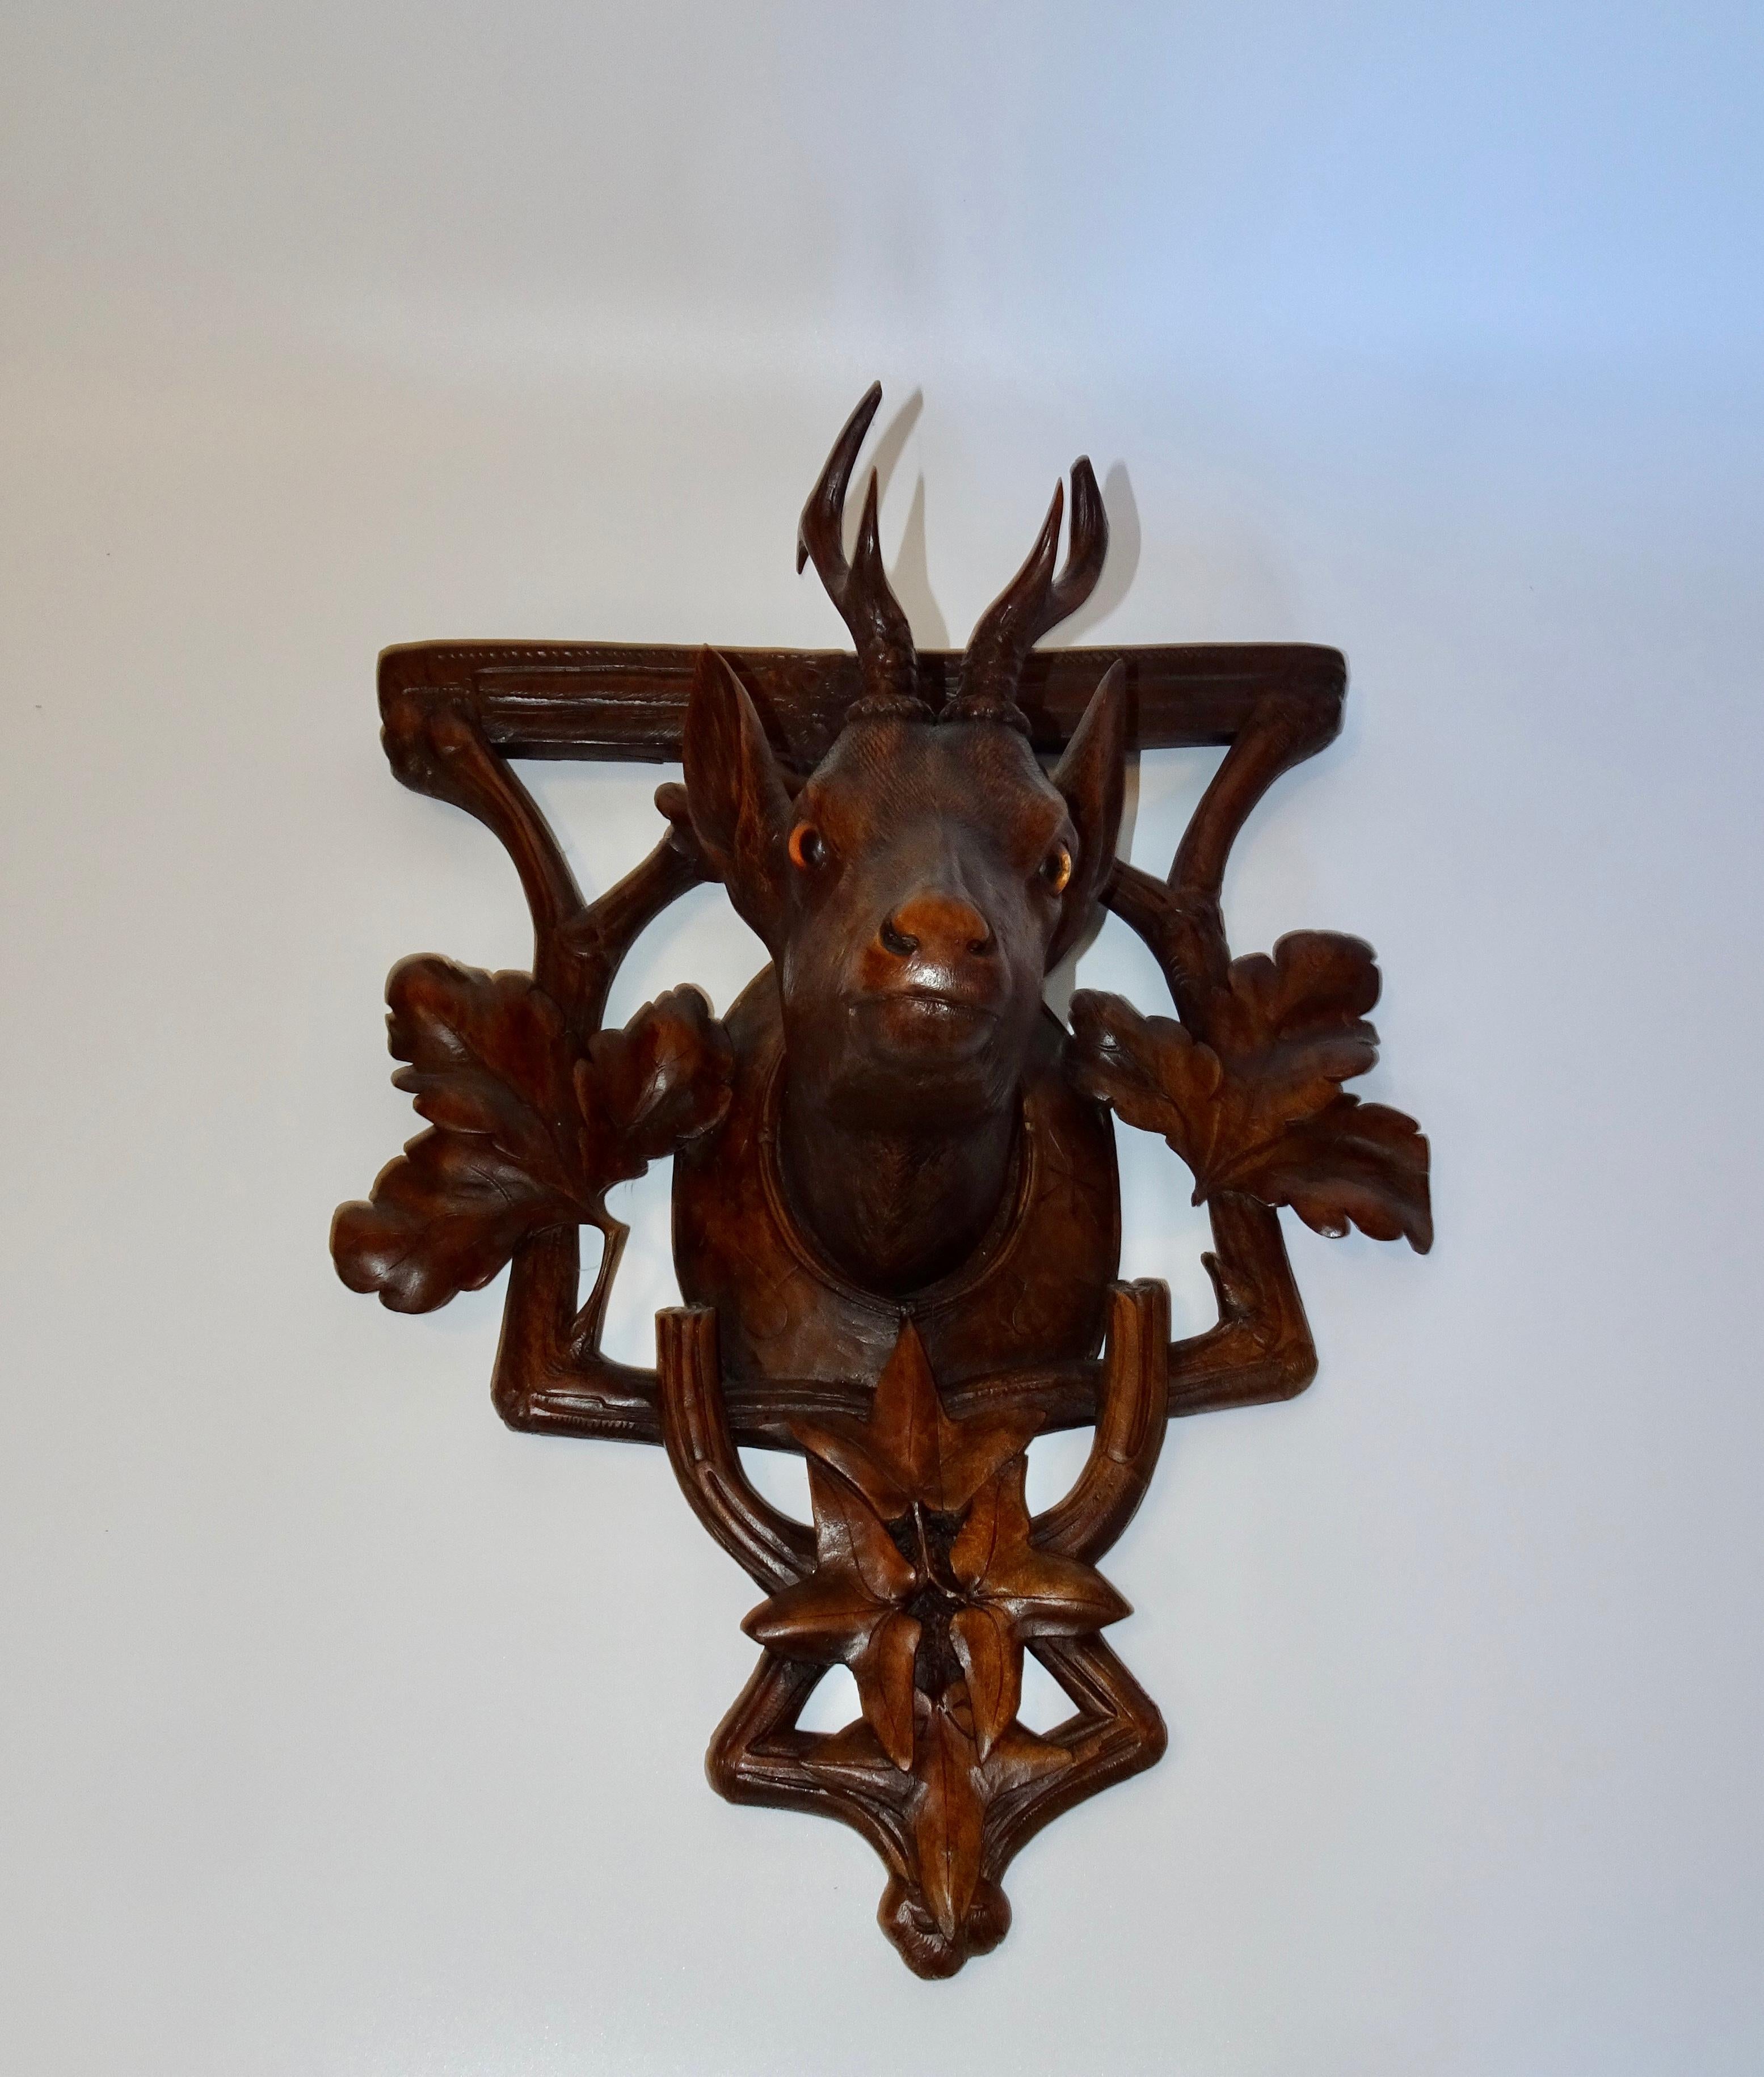 This is a beautiful 19th century black forest carving of a deer head on a carved plaque. The plaque has carvings of leaves and branches.